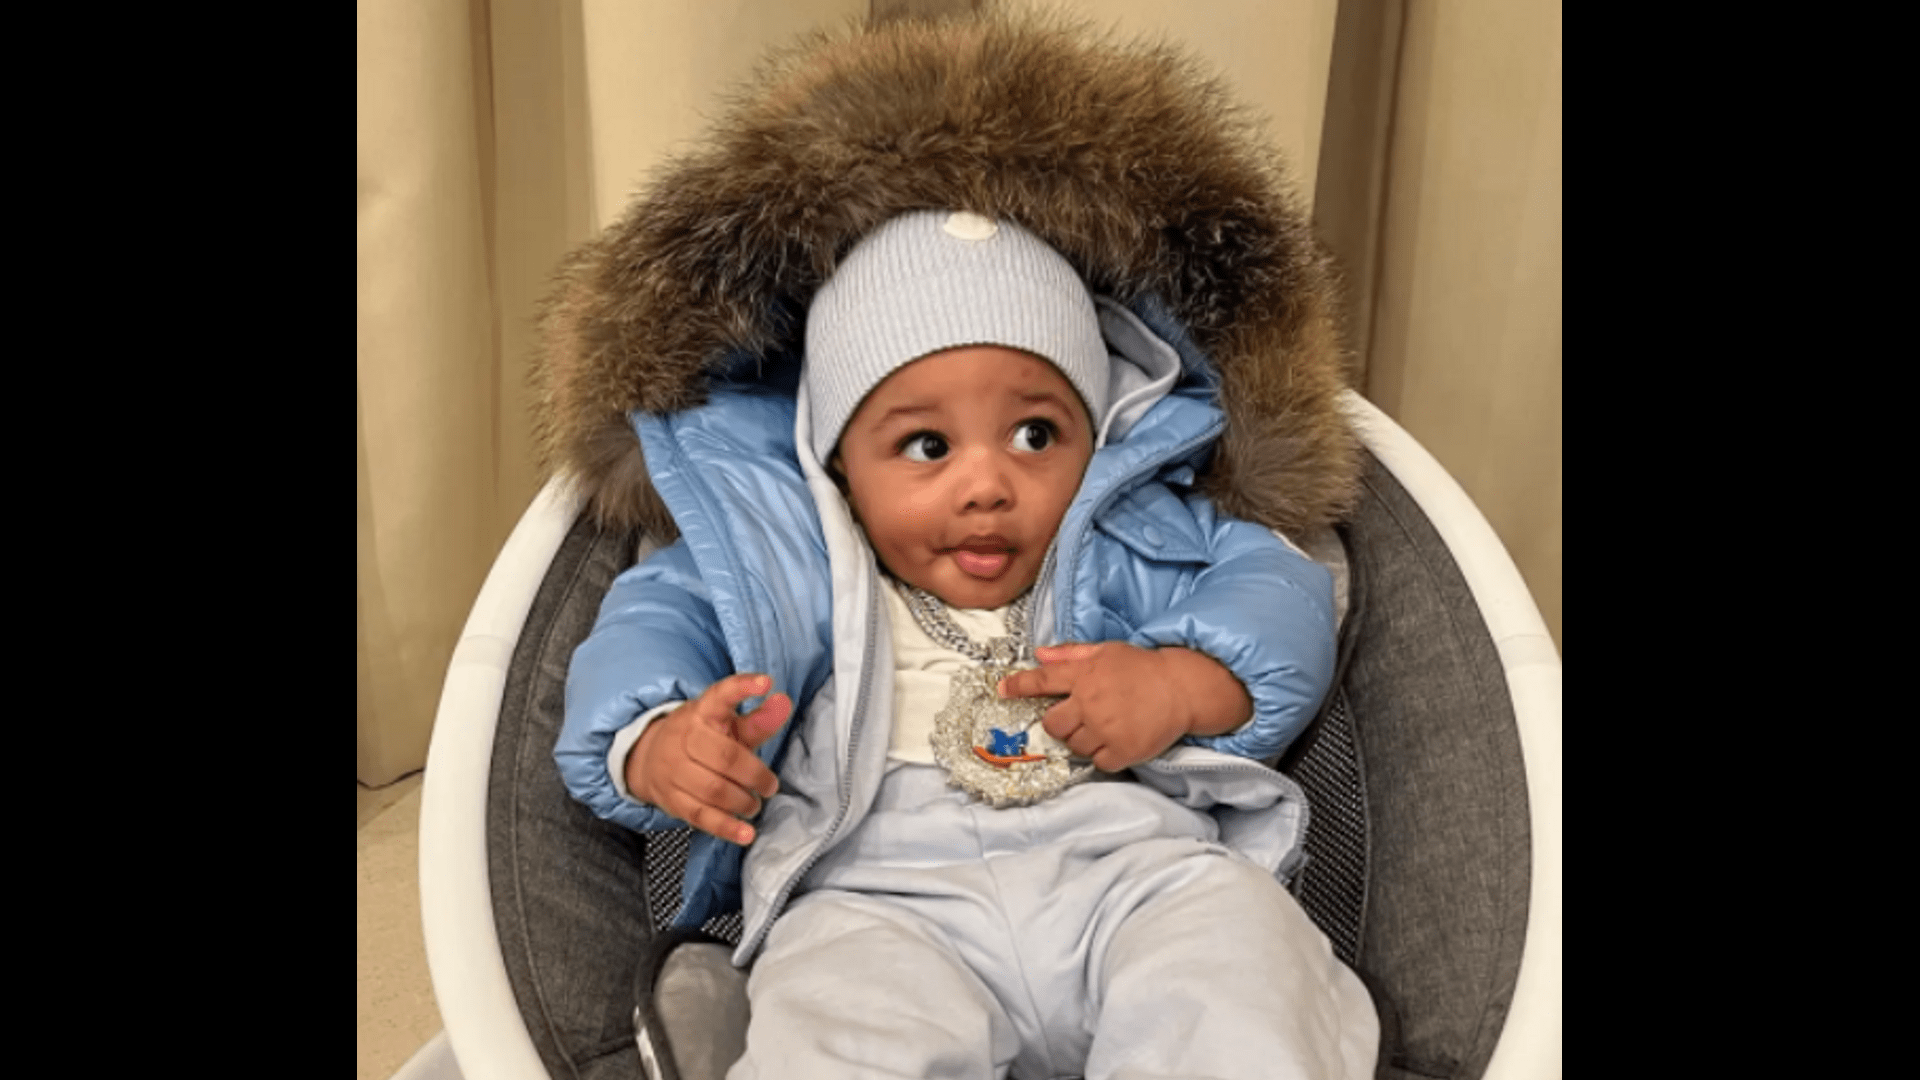 ”in-diamonds-and-with-a-pierced-ear-cardi-b-showed-her-seven-month-old-son”